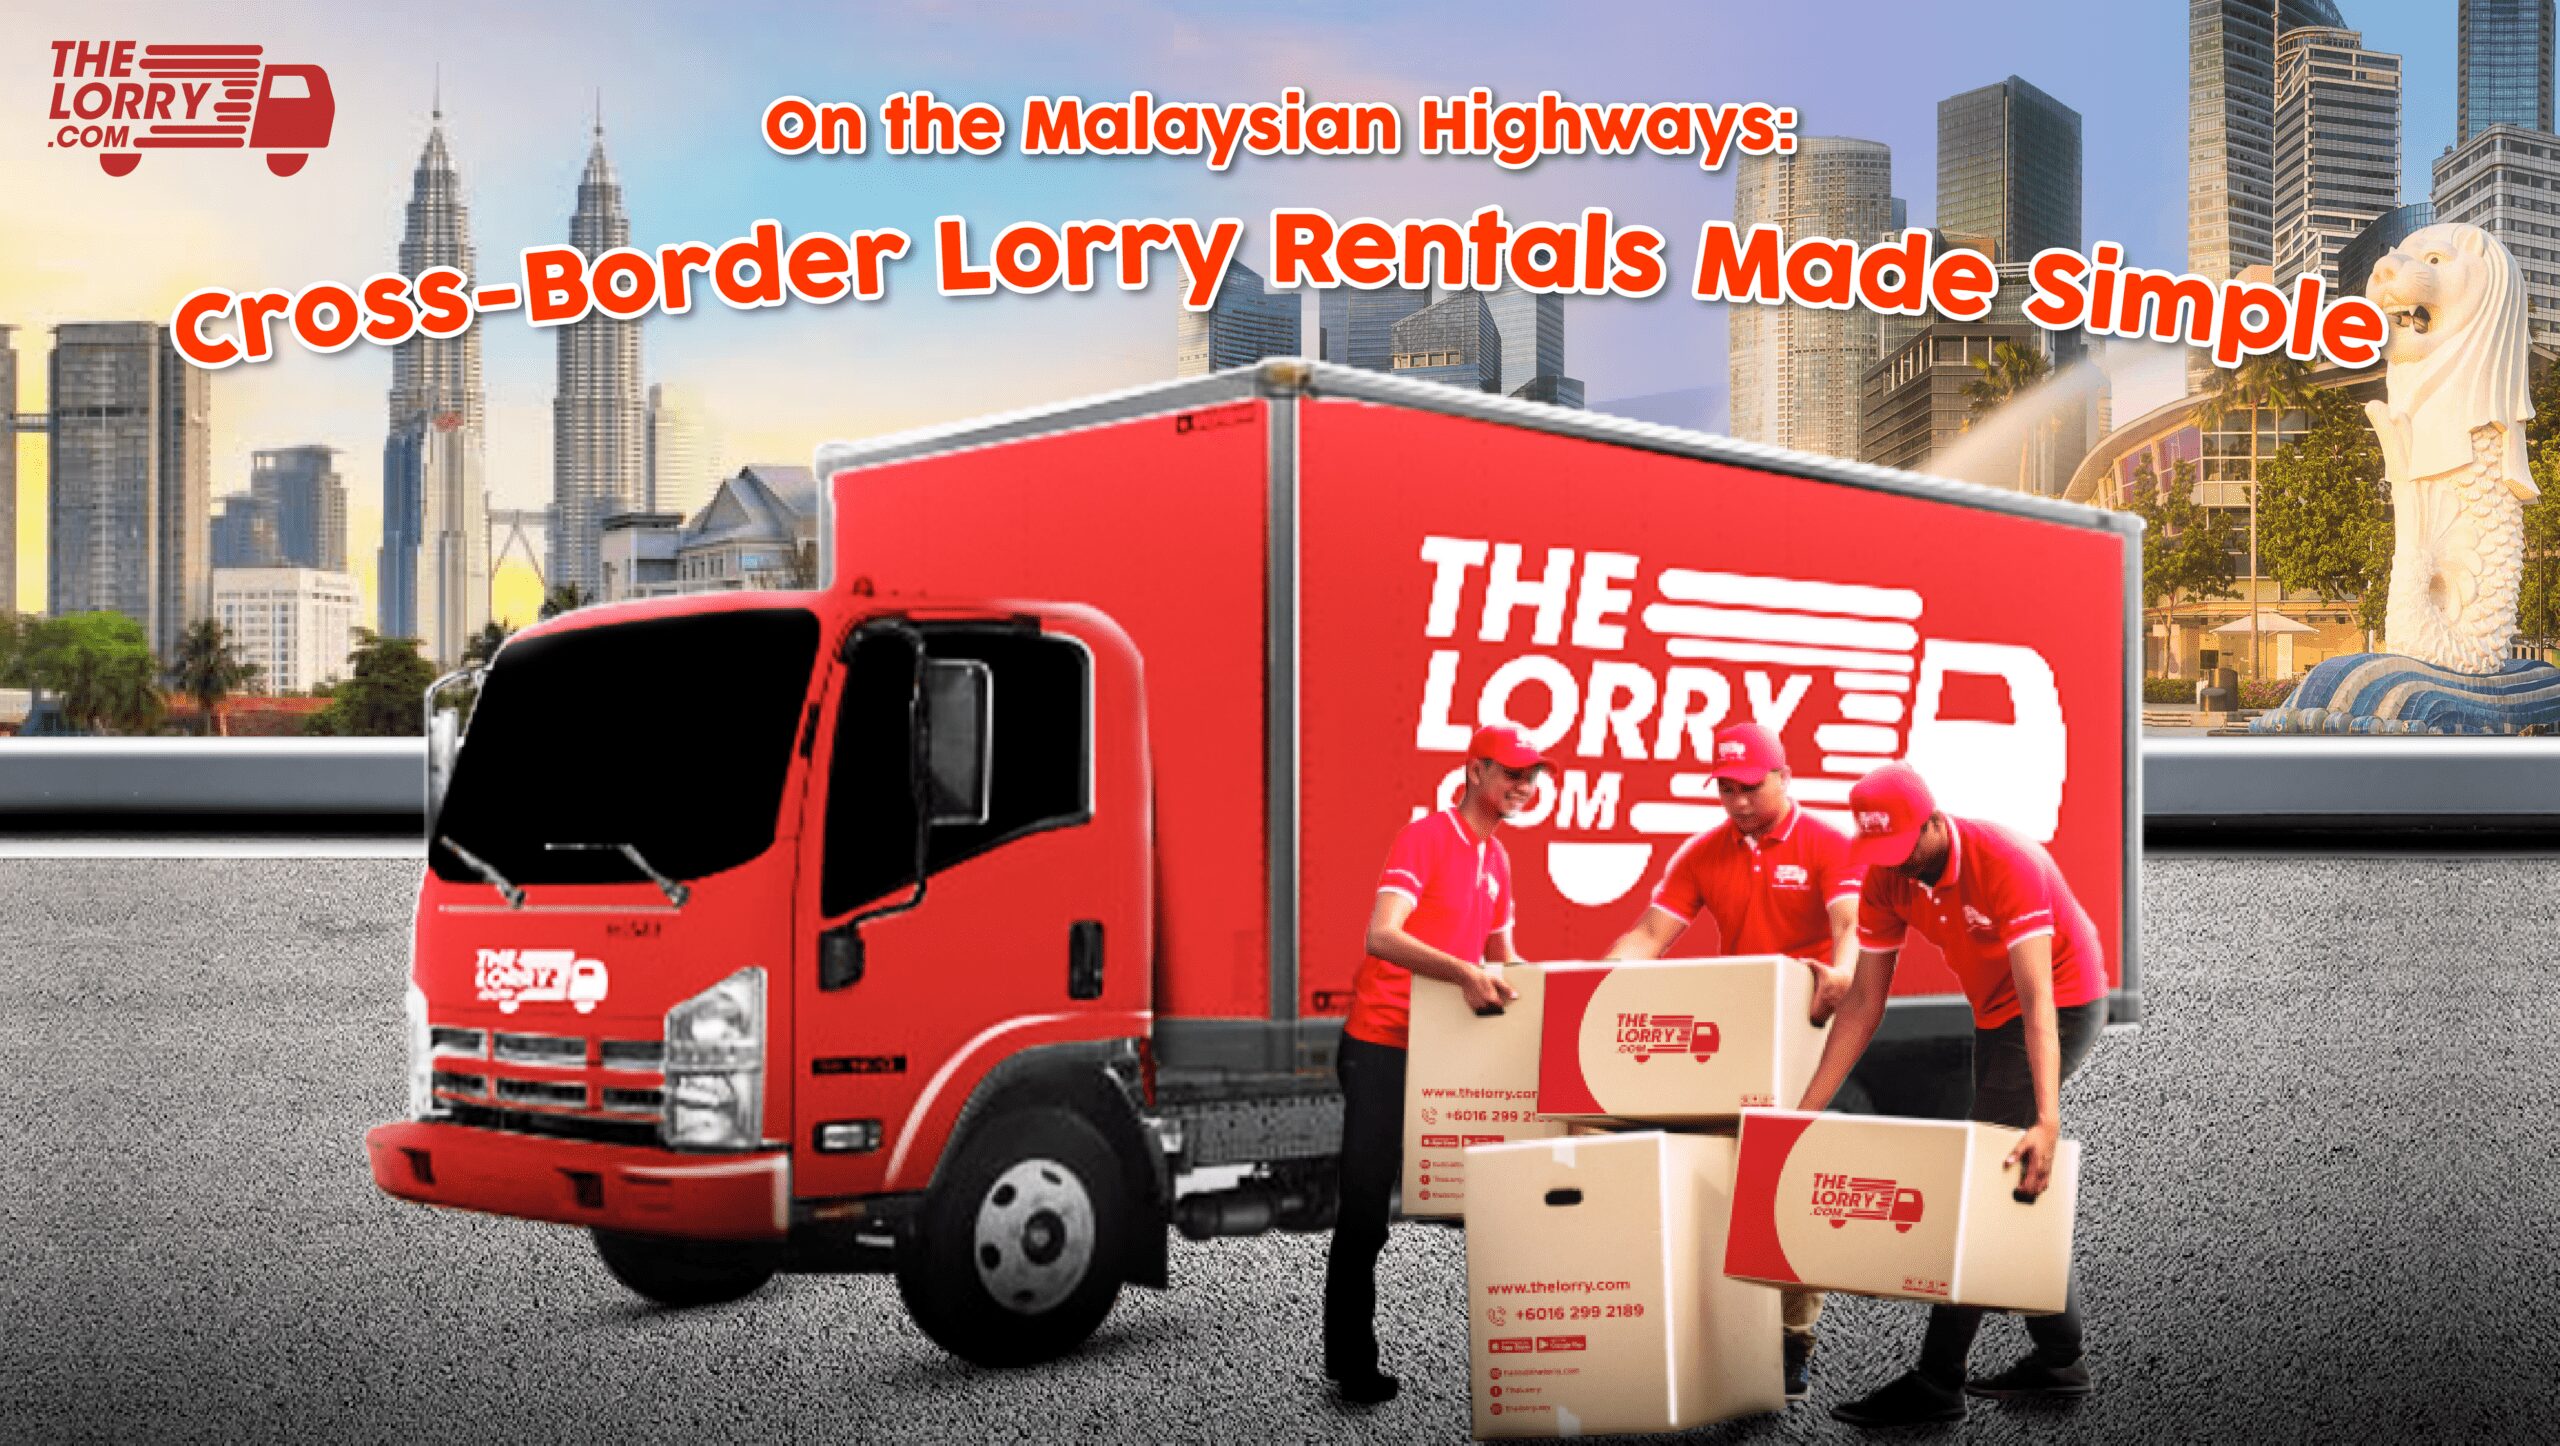 On the Malaysian Highways: Cross-Border Lorry Rentals Made Simple